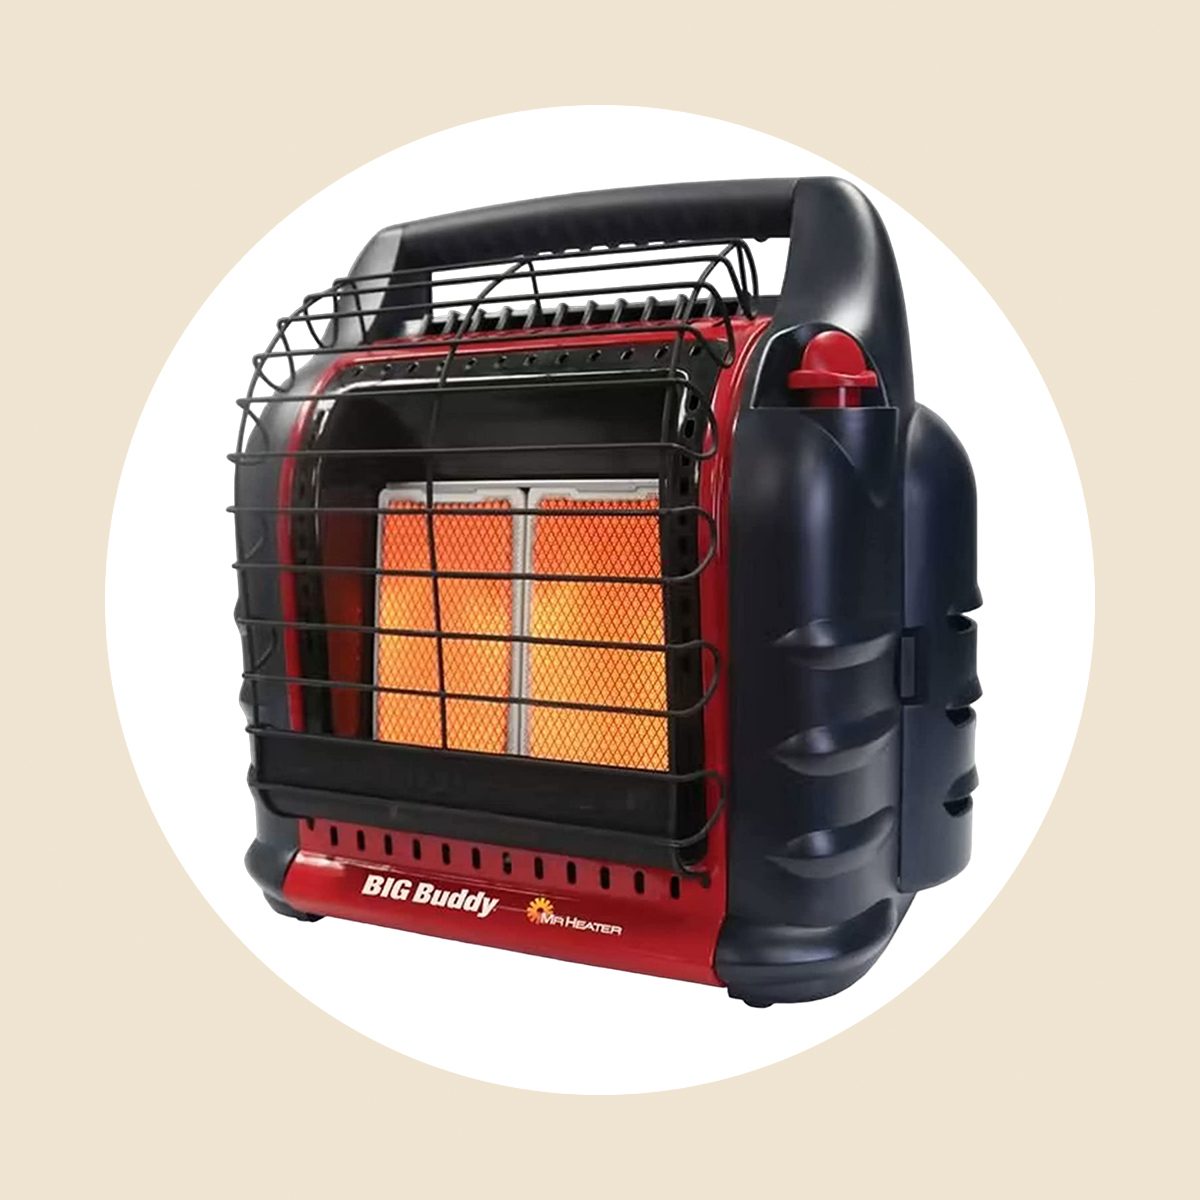 Portable Gas Heaters